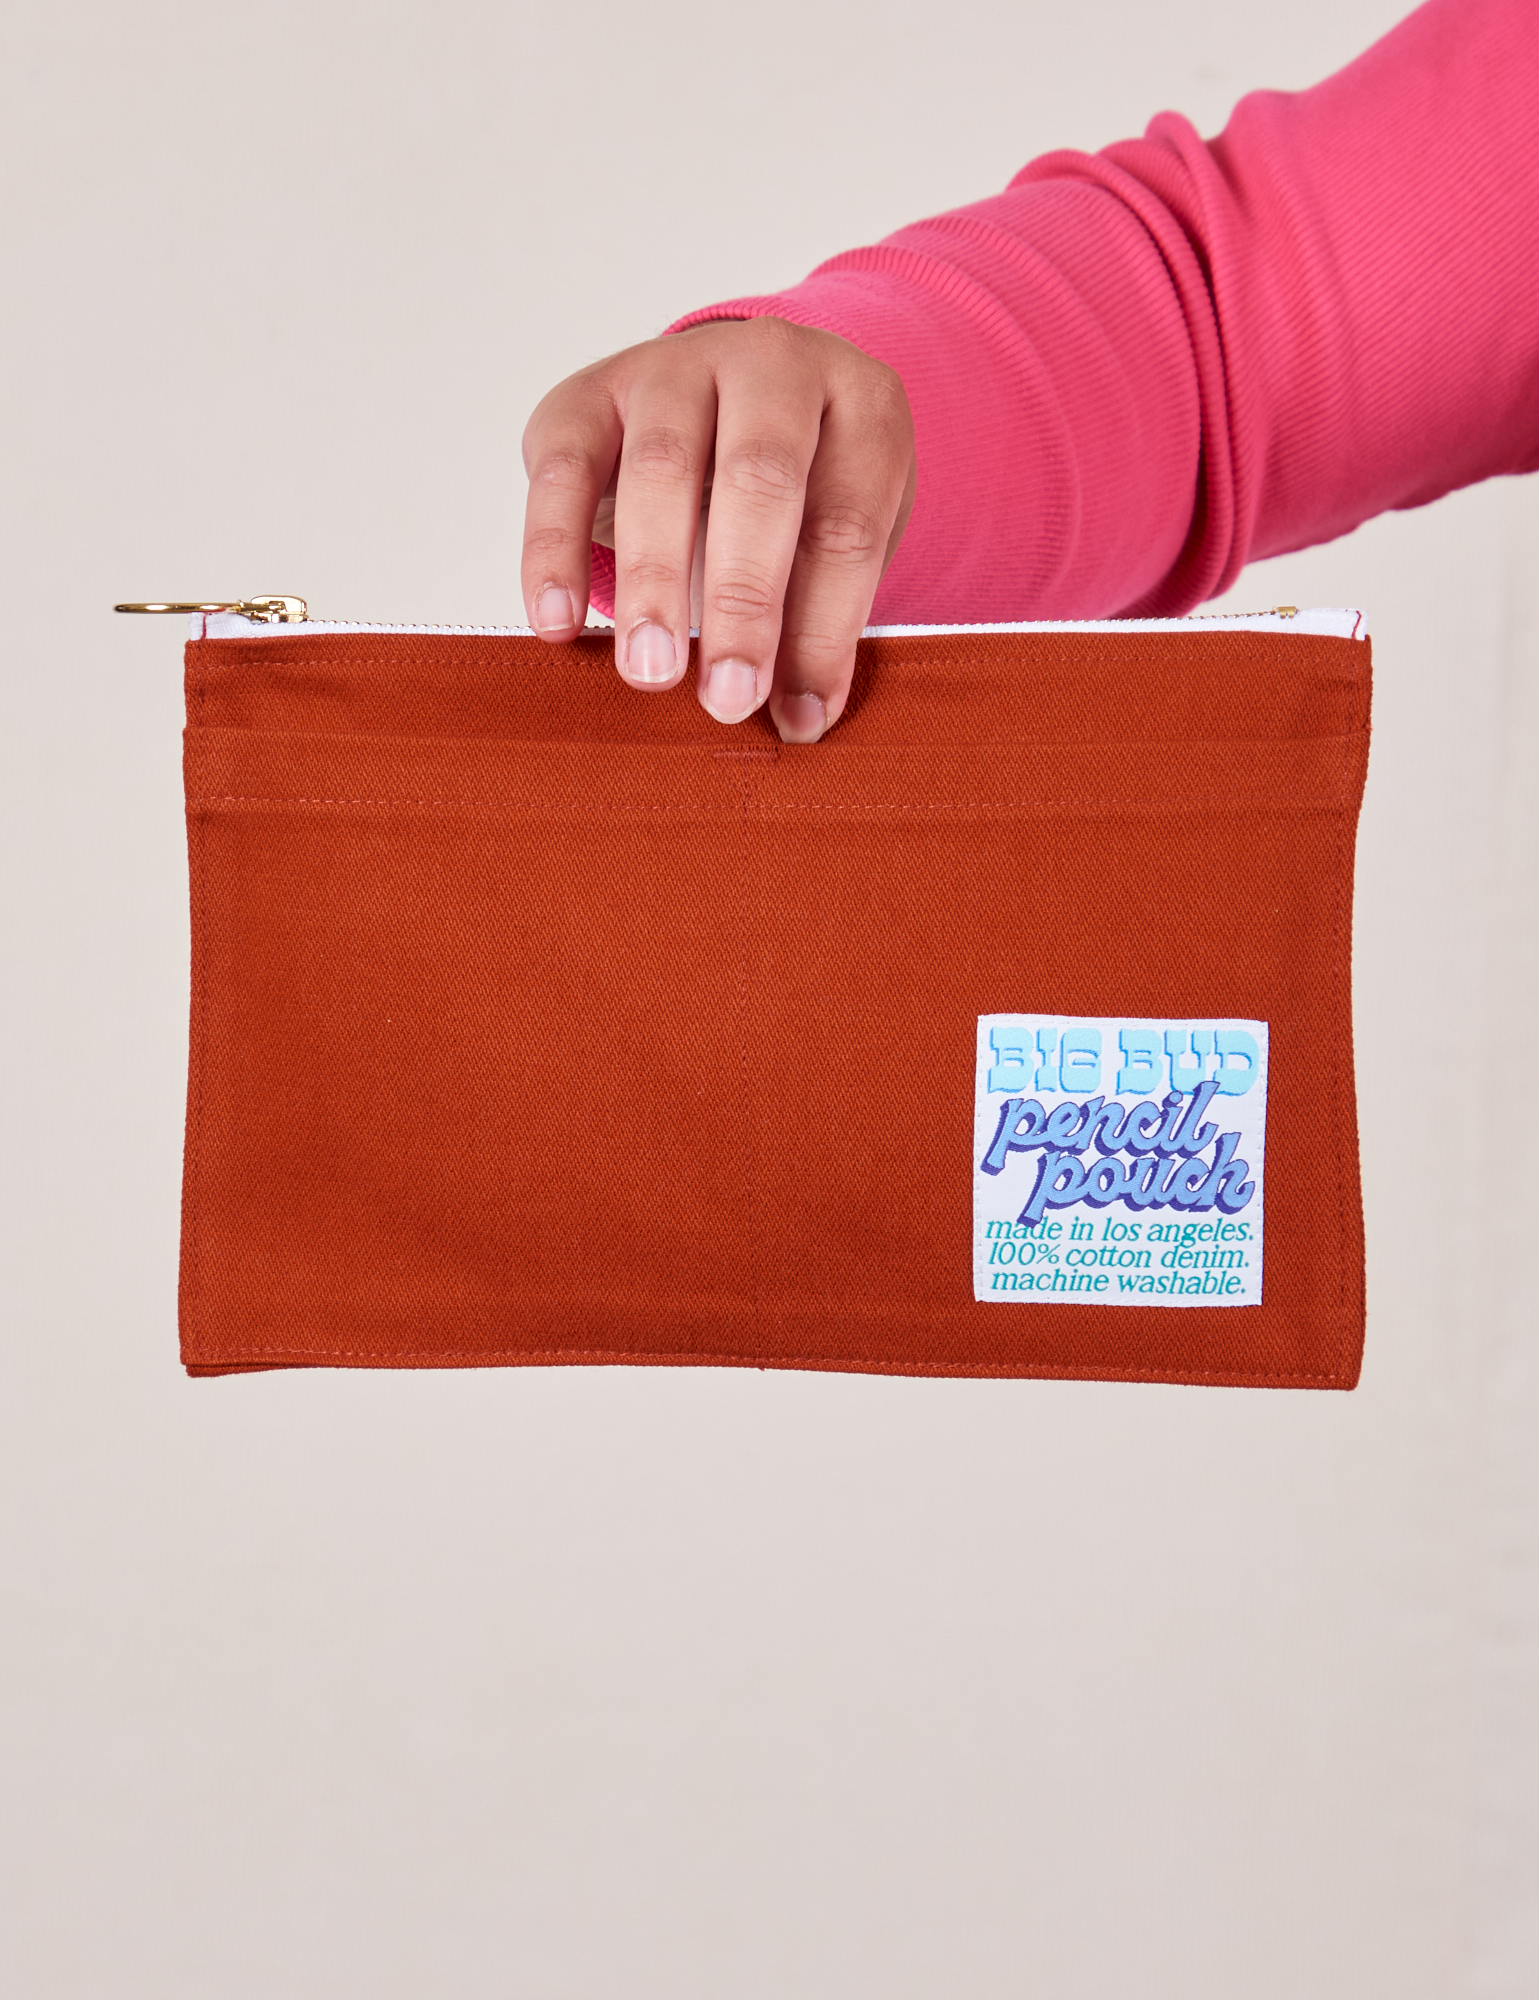 Pencil Pouch in Paprika Red held by model